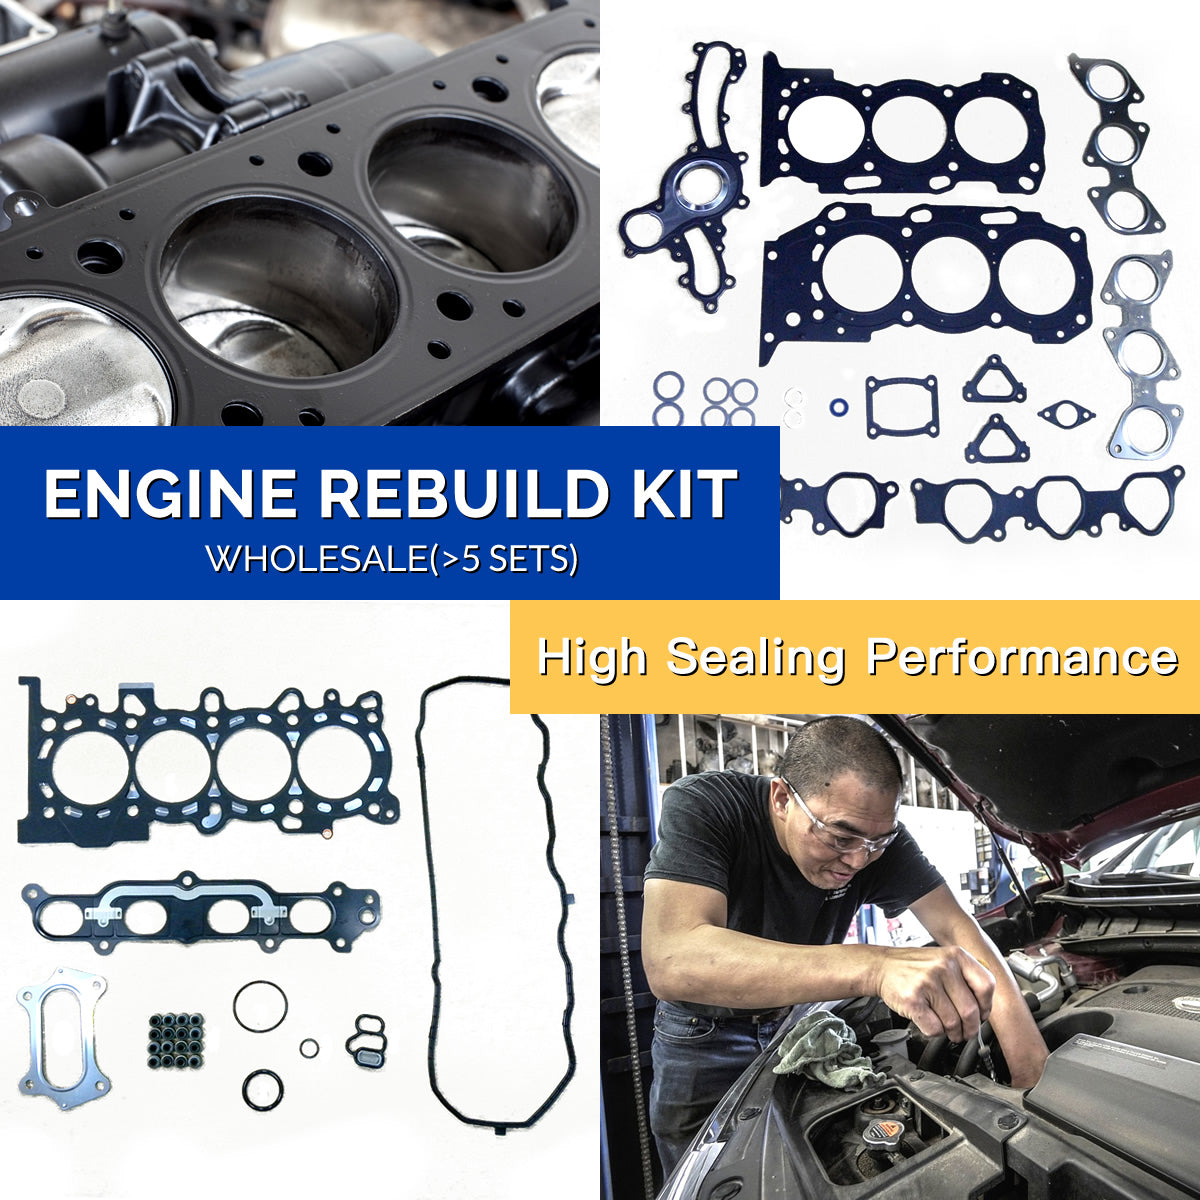 What is the rebuild kit？